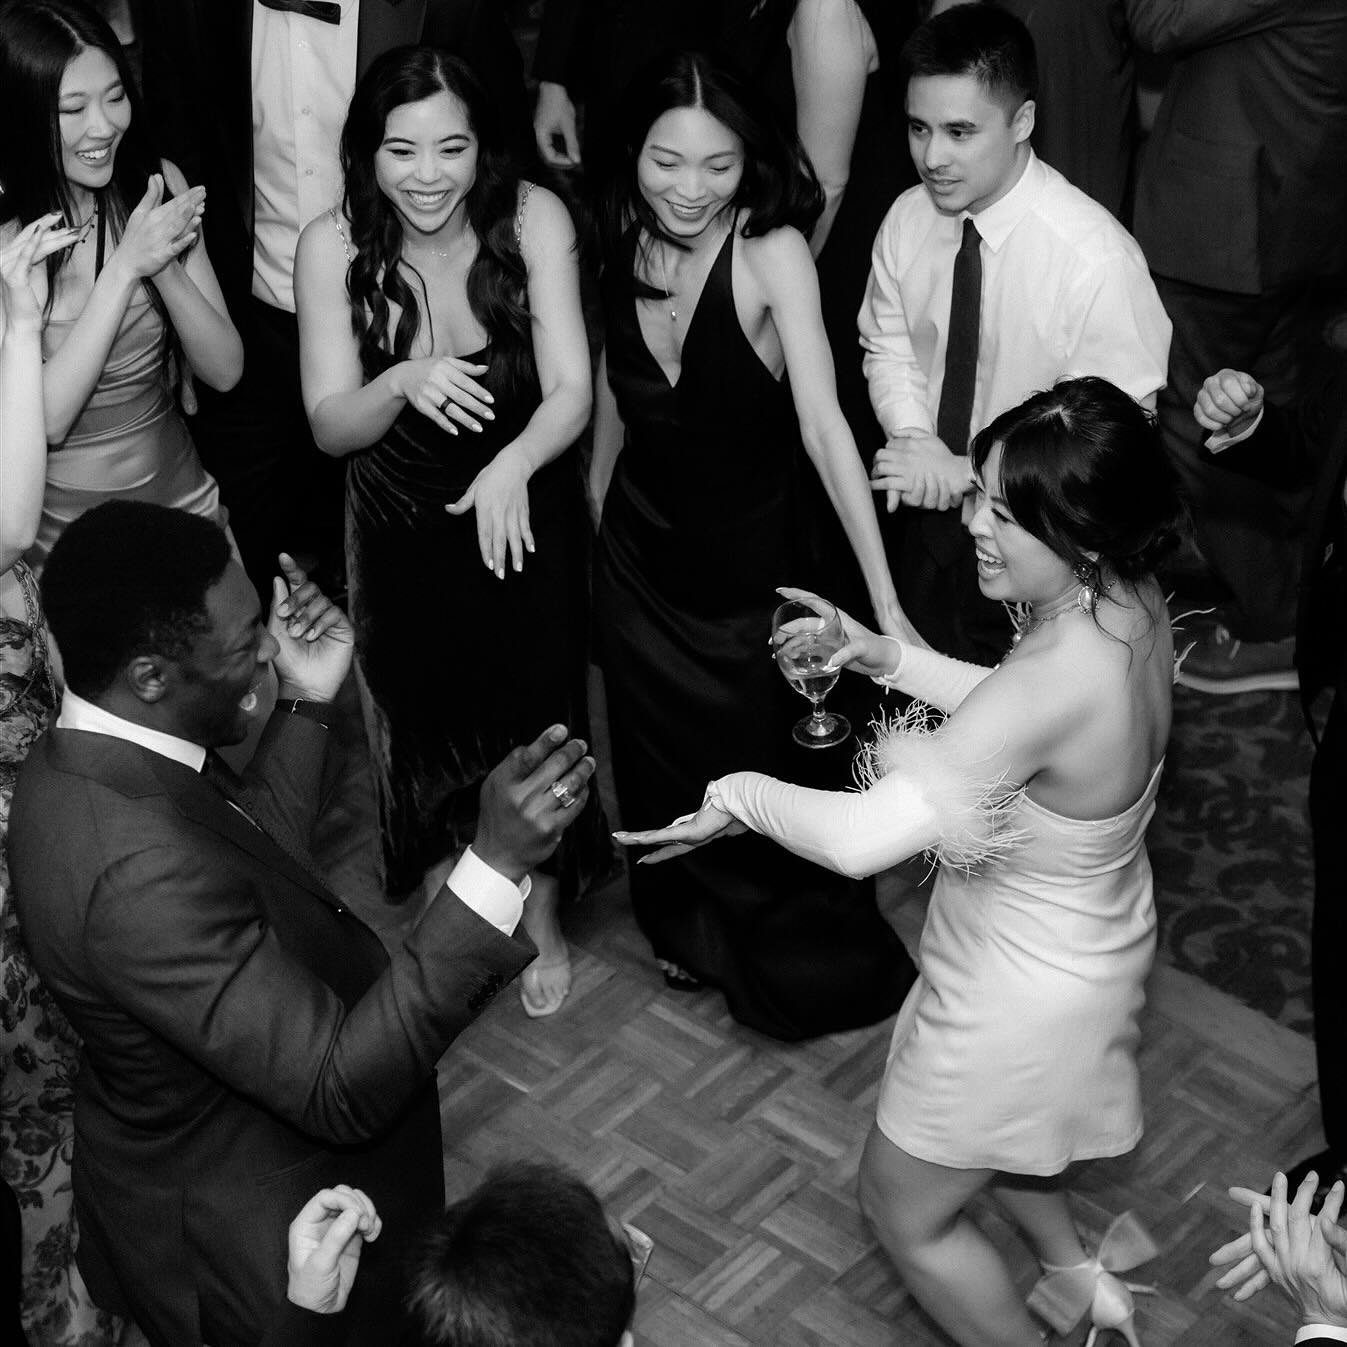 With Finding Friday rocking the night away, Mandy &amp; Javier&rsquo;s reception at The St. Anthony was a party from beginning, to end.  So much dancing. Like, a LOT of dancing. And even more dancing than you&rsquo;re probably imagining. 10/10 this p